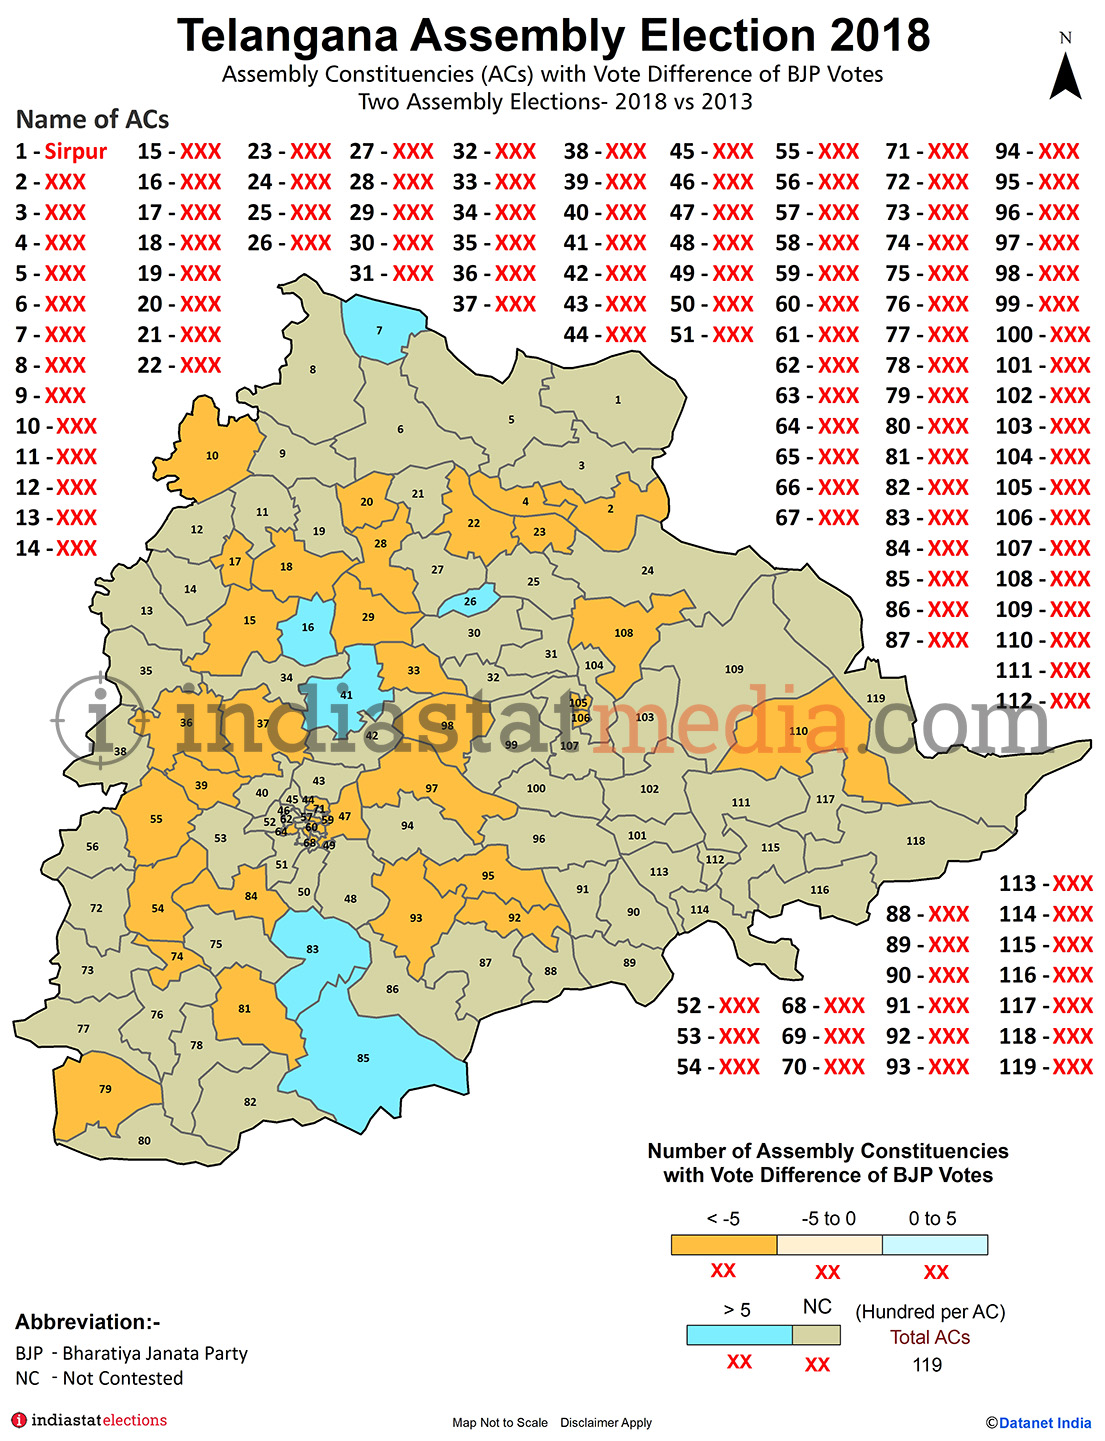 Assembly Constituencies with Vote Difference of BJP Votes in Telangana (Assembly Elections - 2013 & 2018)